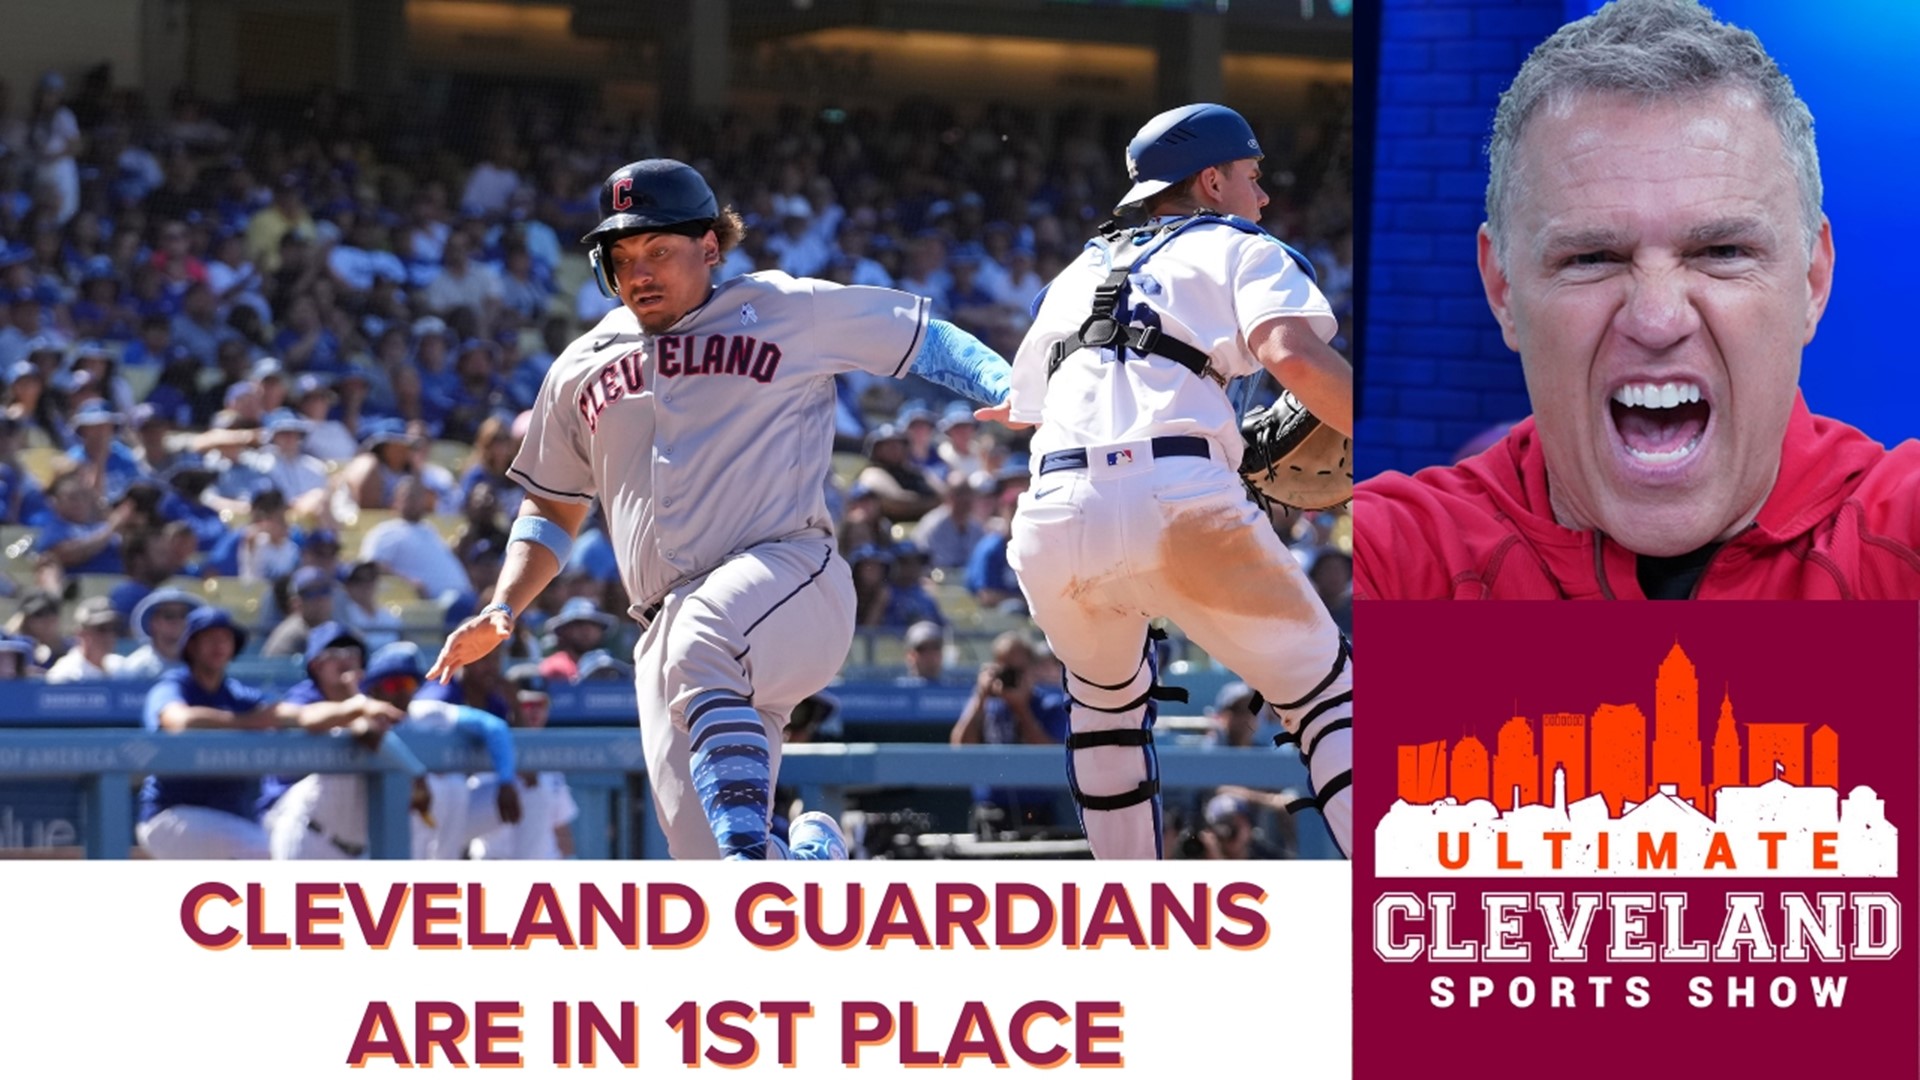 Adam and Jay say the fans of the Cleveland Guardians need to attend the games and support the team, especially when the Red Sox and